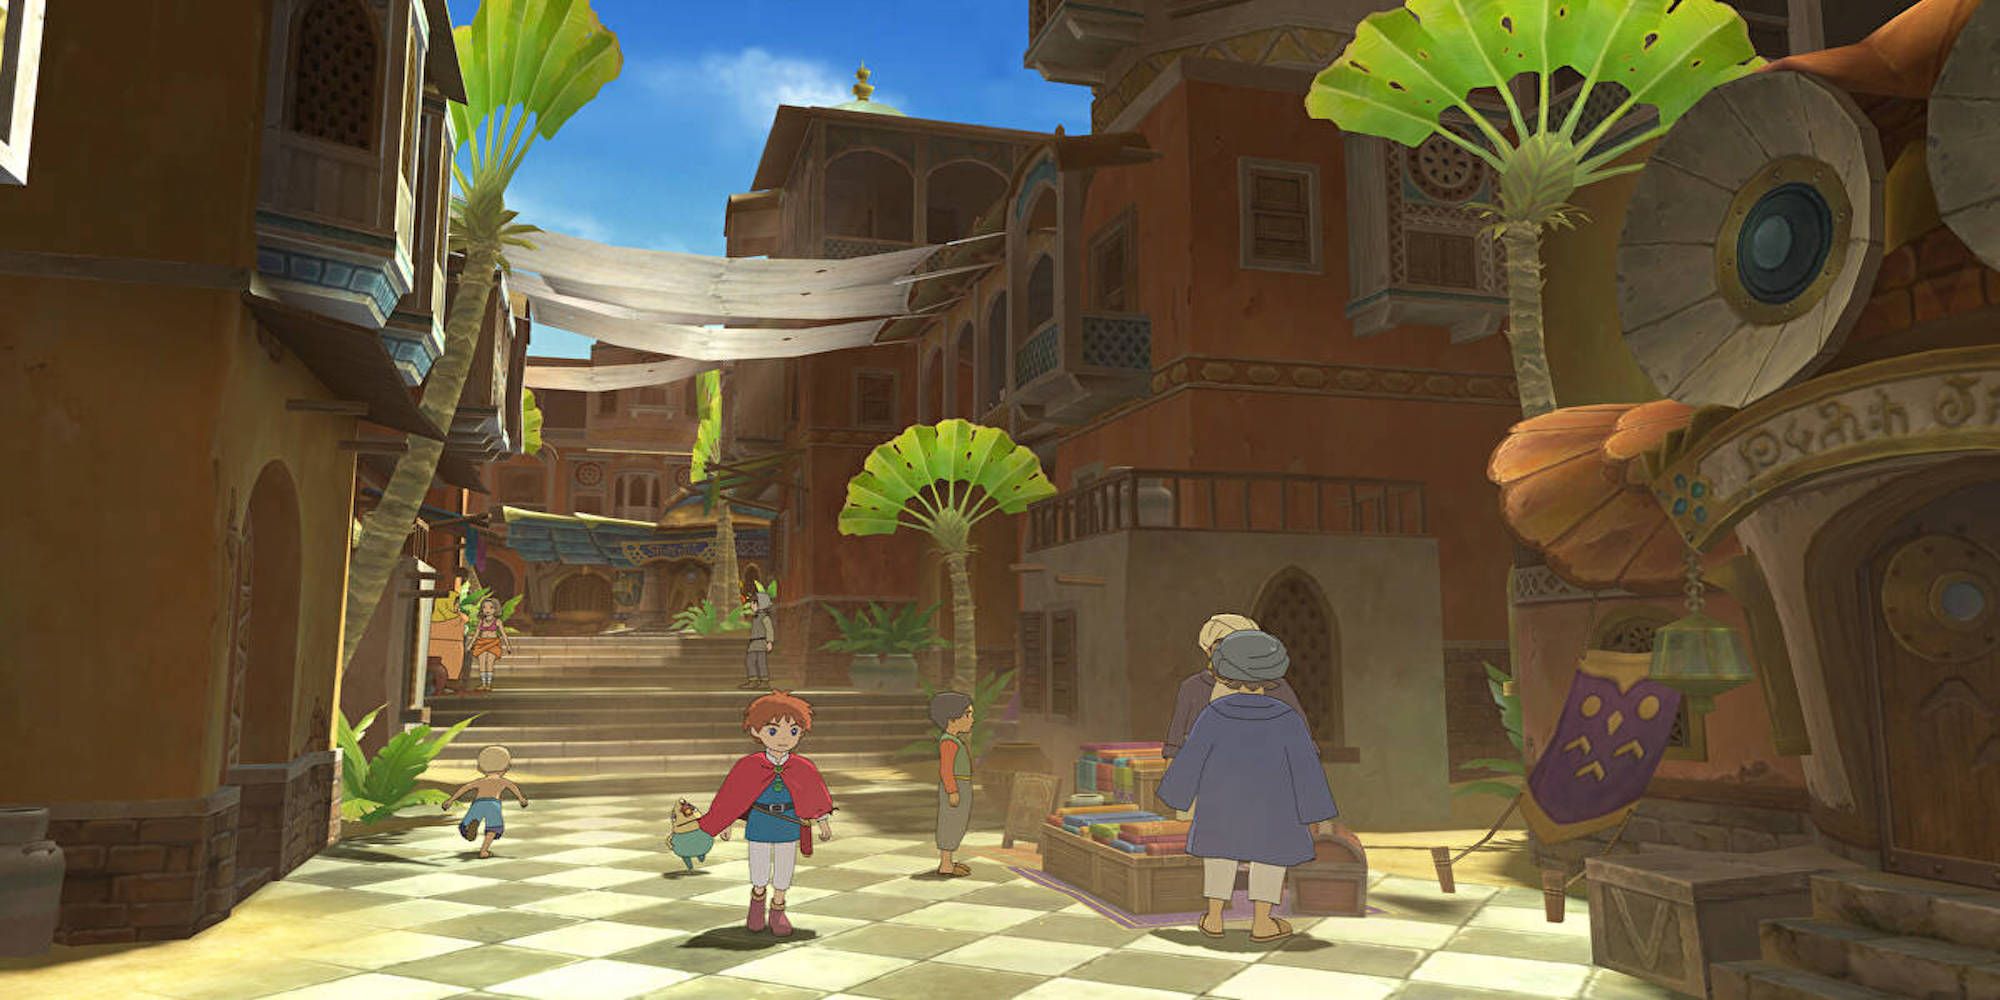 Gameplay from Ni no Kuni: Wrath of the White Witch